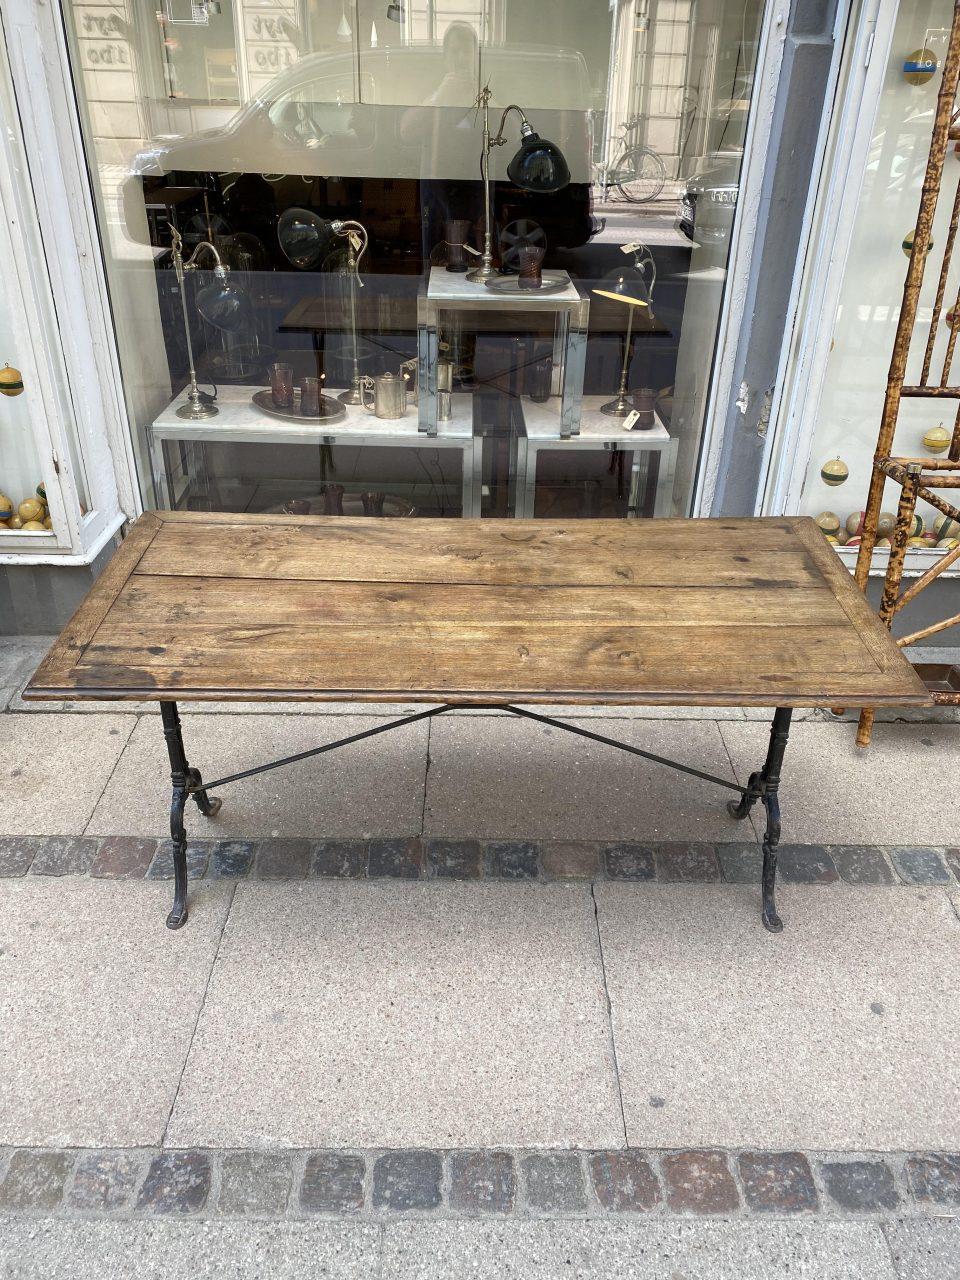 Large and handsome bistro table, with a cast iron under frame and elegant wooden tabletop, which has a wonderful warm and welcoming sheen. Used as a dining table in a Classic French bistro. Would be a lovely alternative too as a console table in a